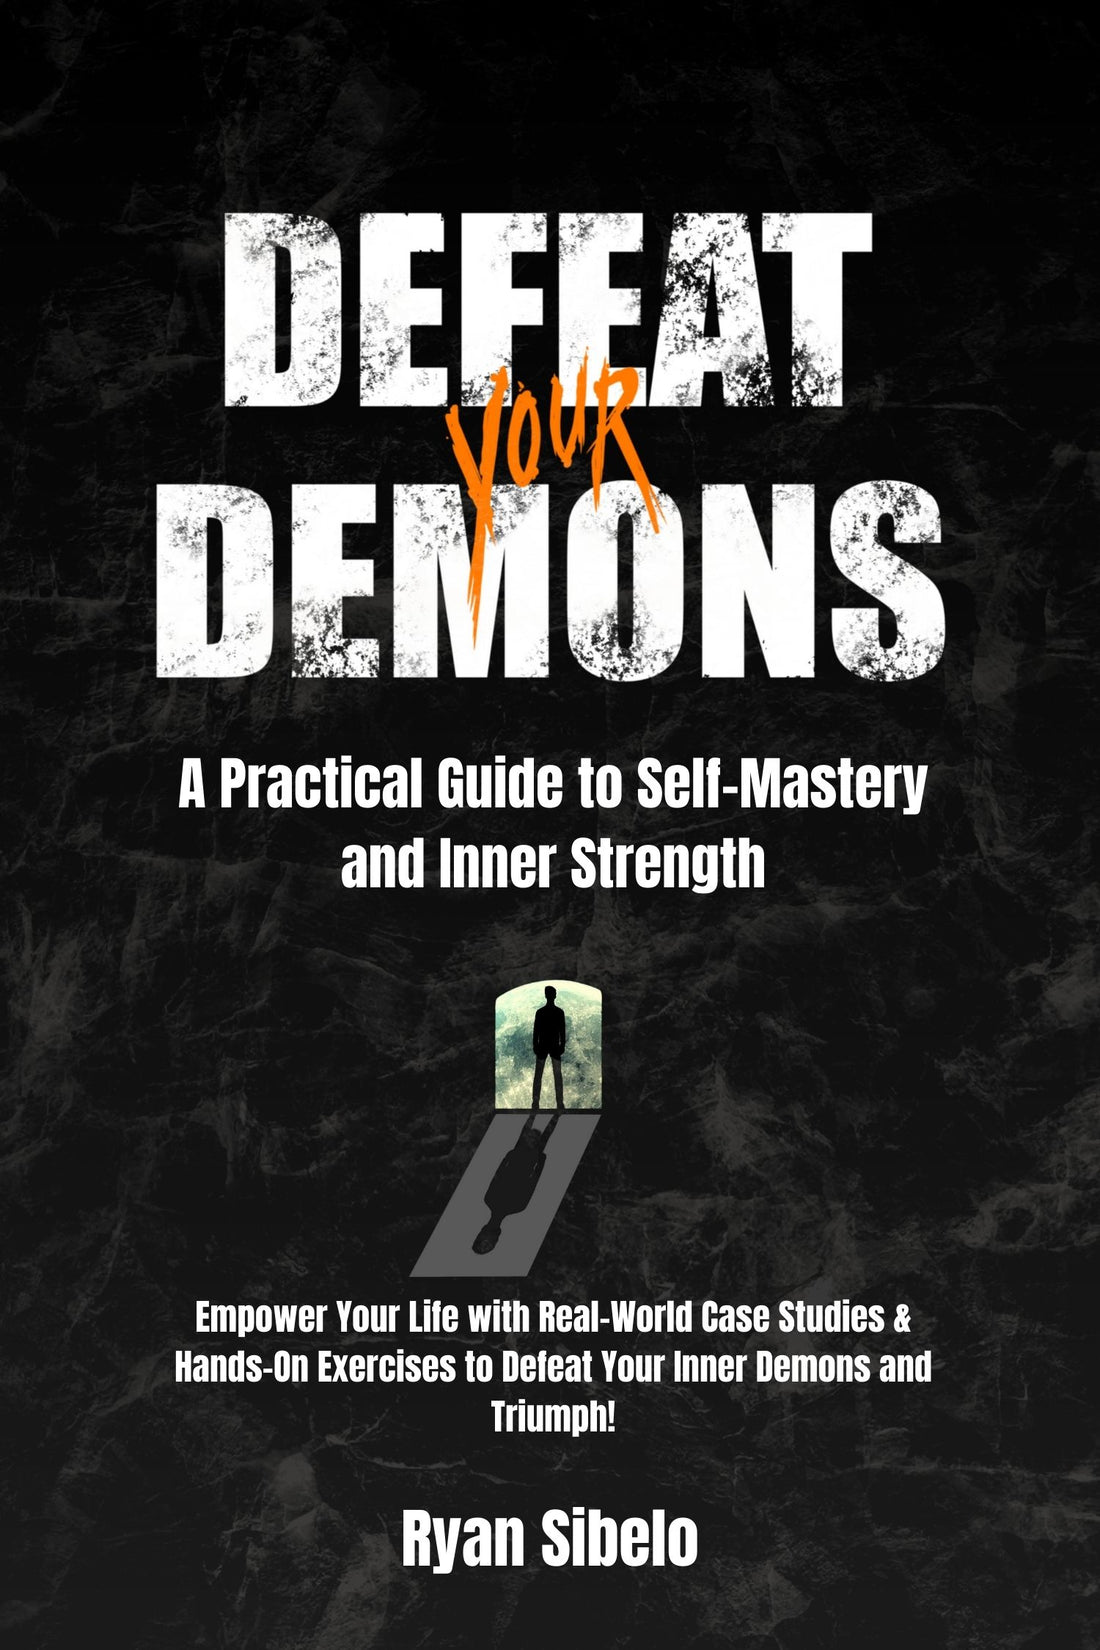 Introducing: "Defeat Your Demons - A Practical Guide to Self-Mastery and Inner Strength